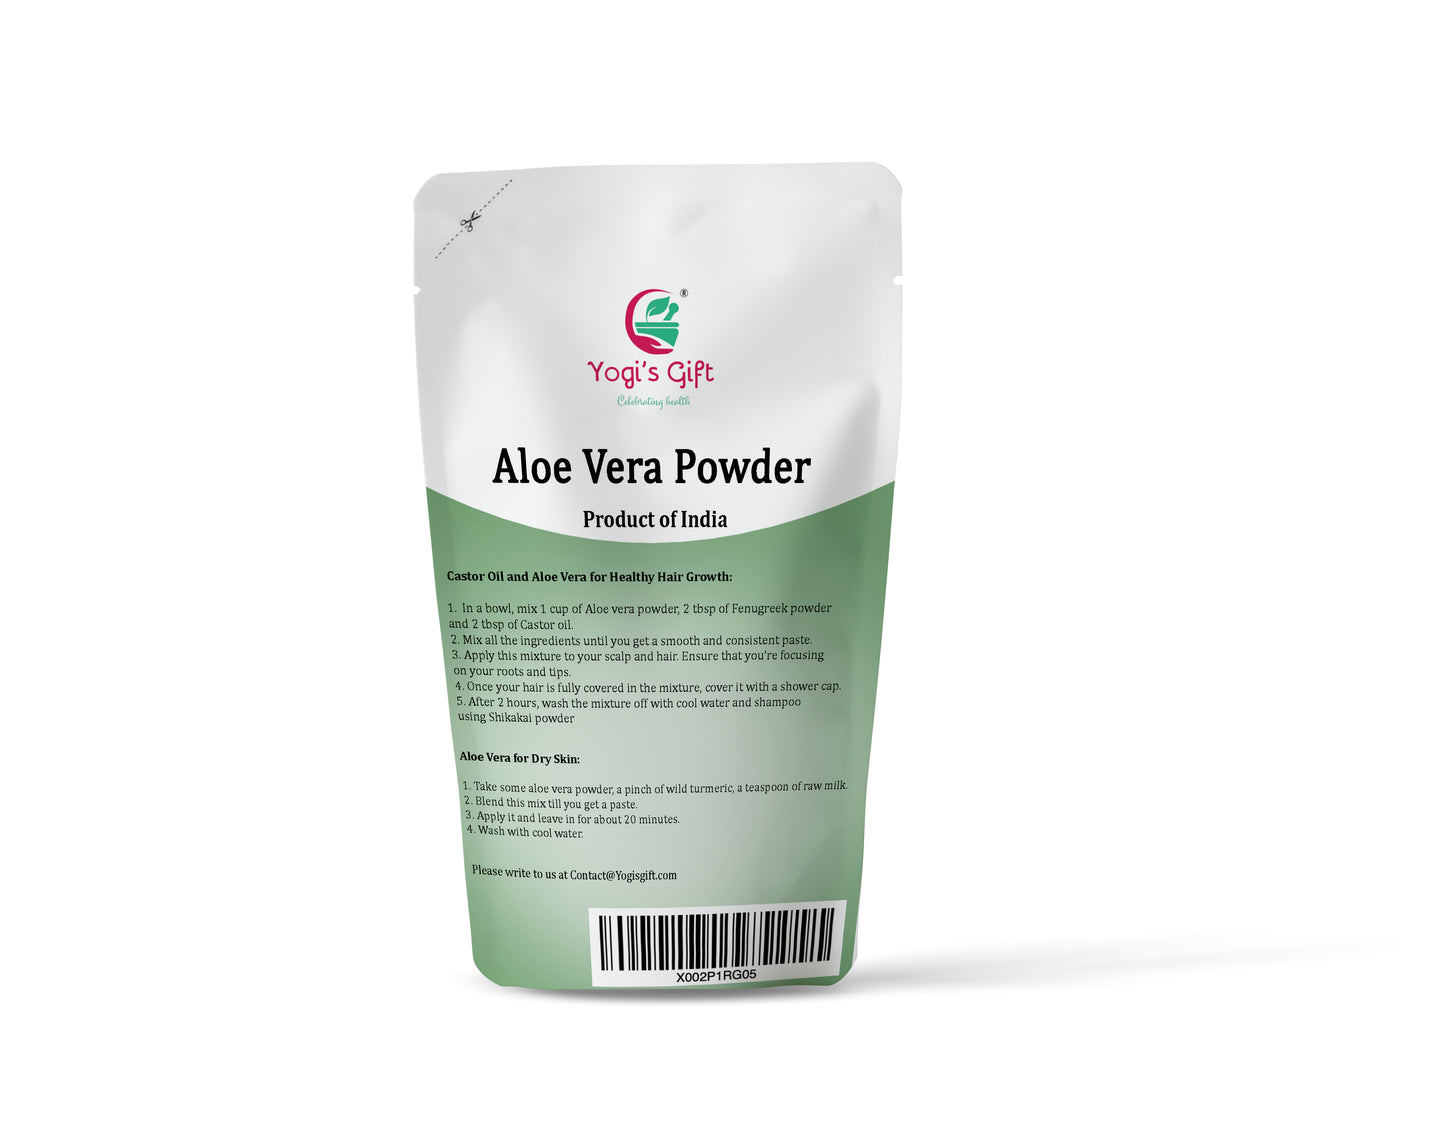 Aloe Vera Powder 8 oz | Moisturizing Face Mask For Dry Skin | Hair Mask for Hair Growth | Made from Pure & Organically Cultivated Aloevera